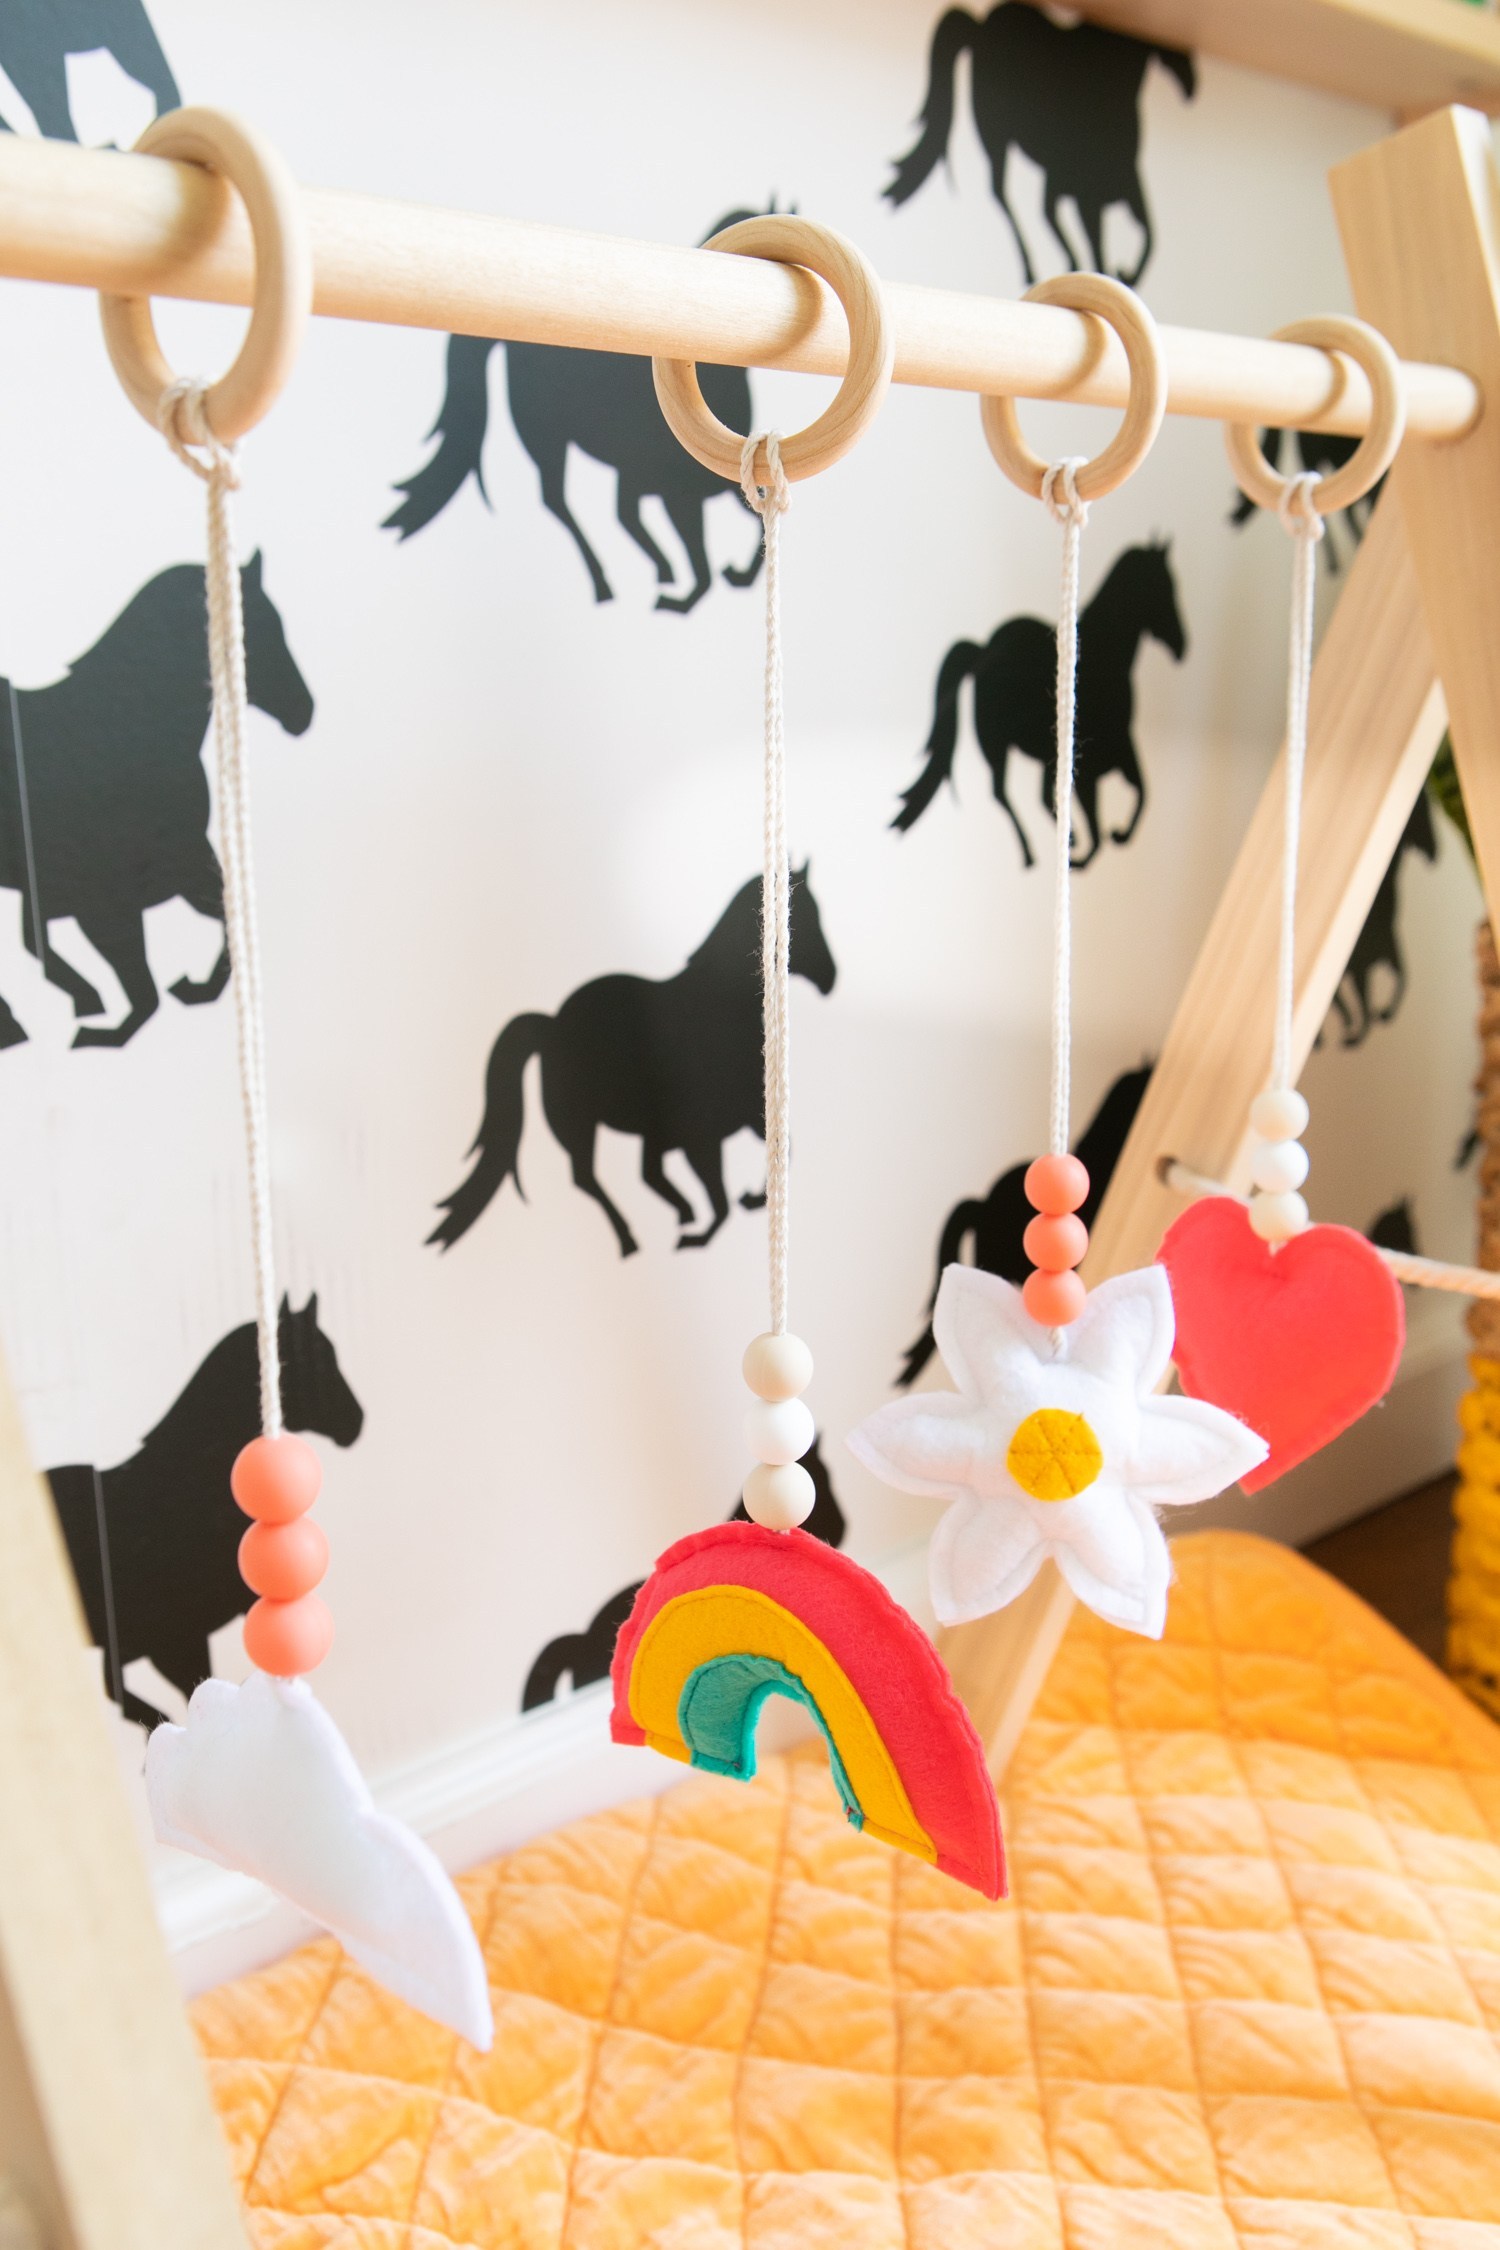 DIY baby gym with colorful sewn toys